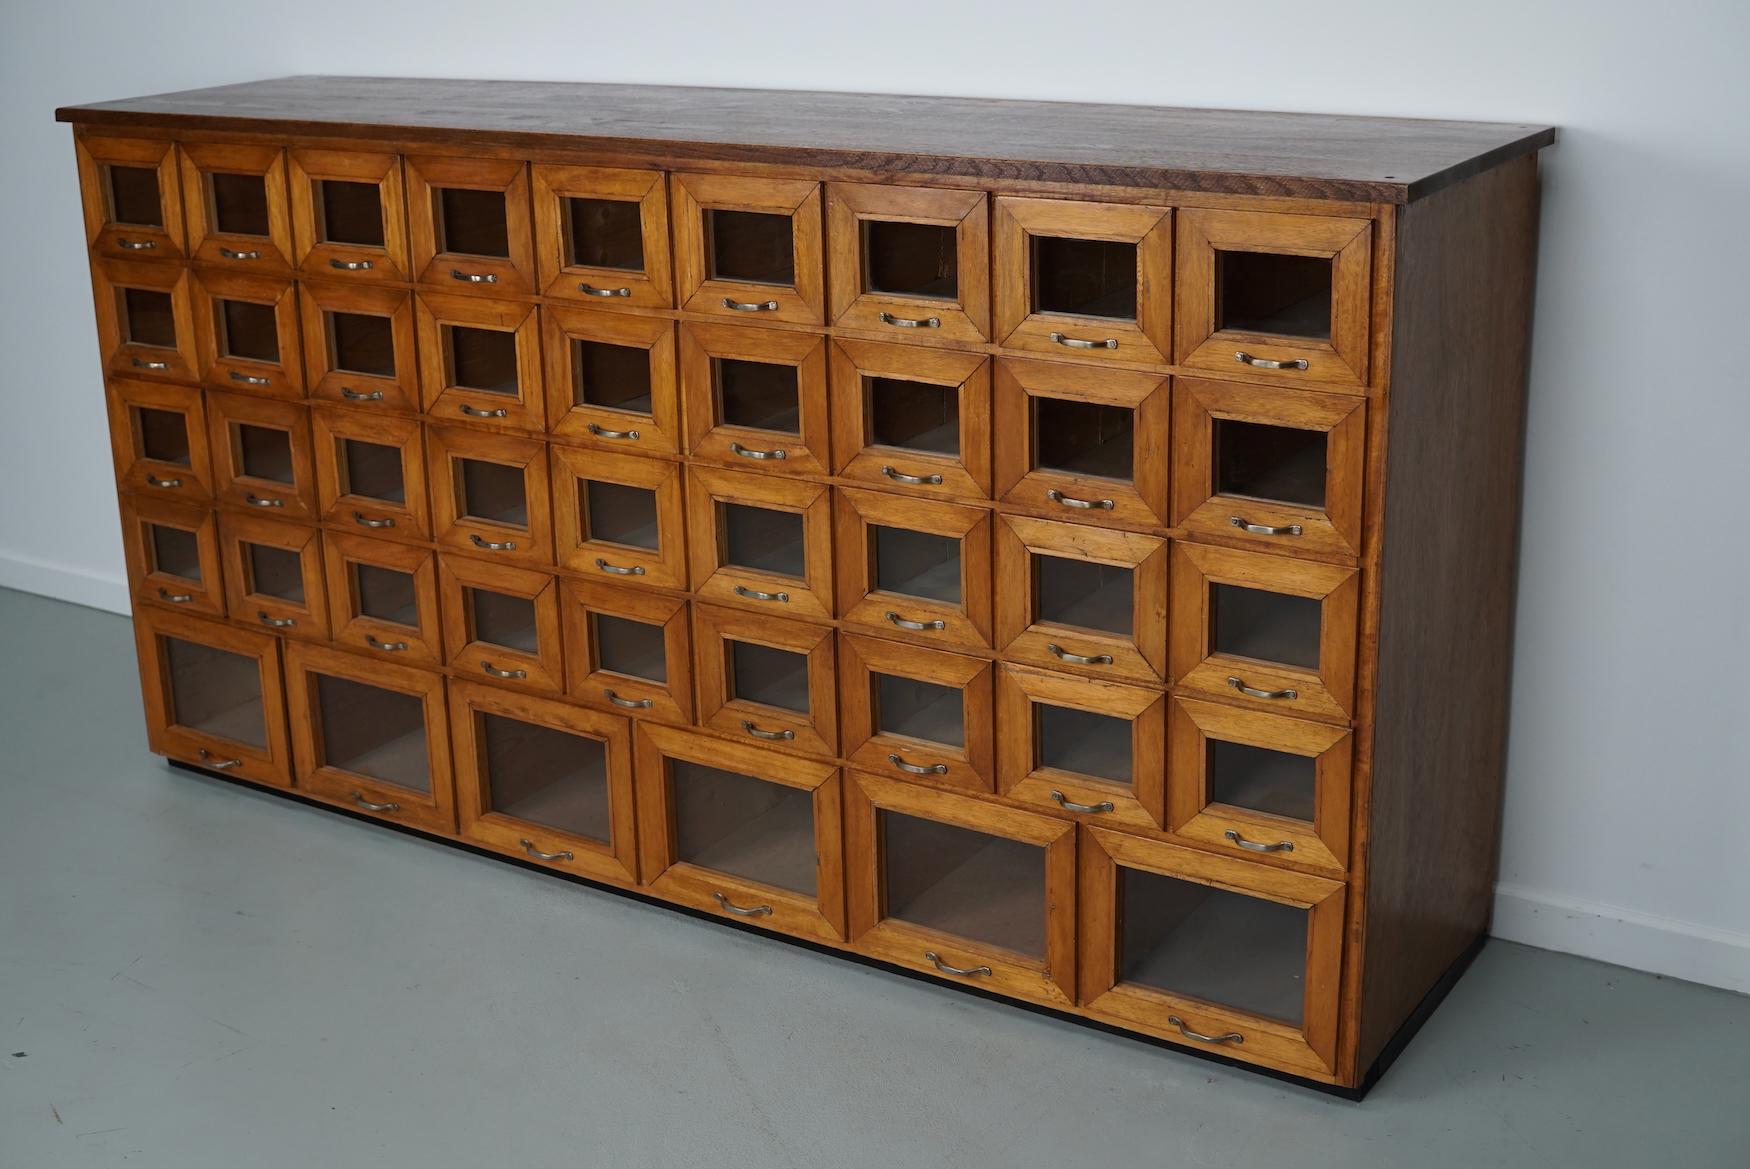 This haberdashery cabinet was produced during the 1950s in the Netherlands. It features 42 drawers in oak with glass fronts and metal handles. It was originally used in a warehouse for plant seeds in the city of Delft. The interior dimensions of the